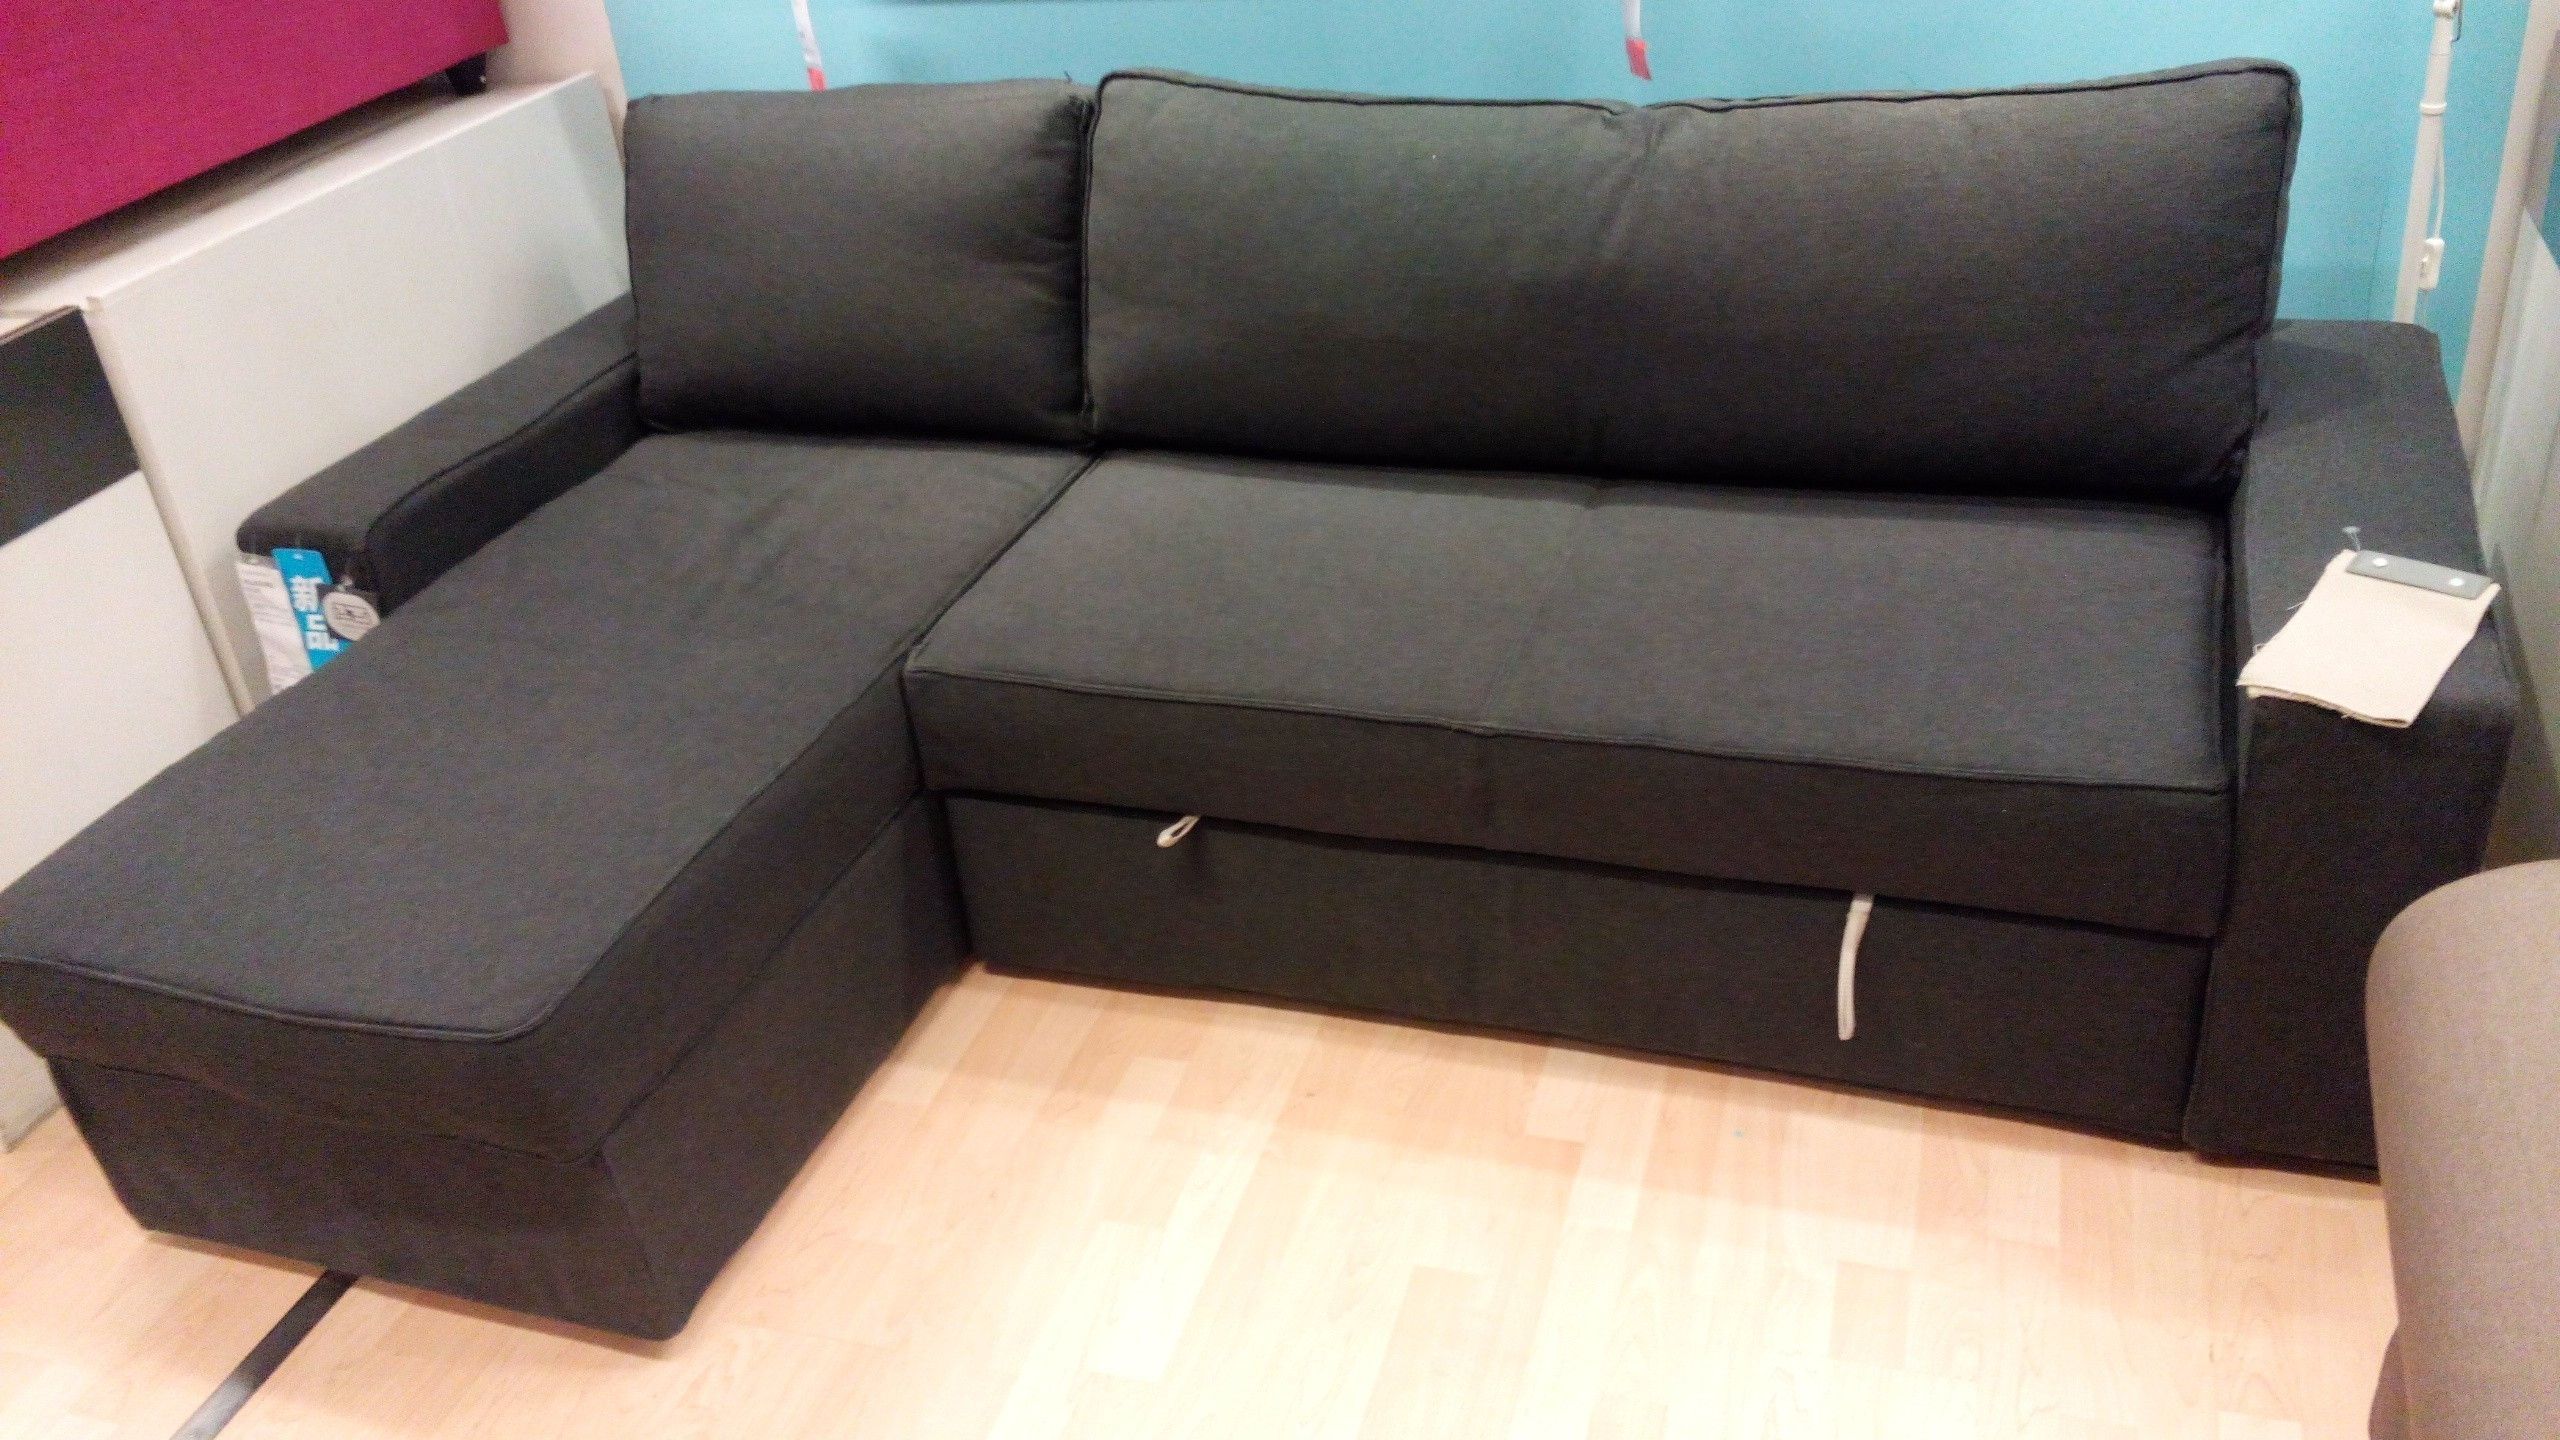 Sleeper Sofas Ikea Amazing Sectional Sofa Perfect #20839 Cozy Pertaining To Sectional Sofas At Ikea (View 9 of 10)